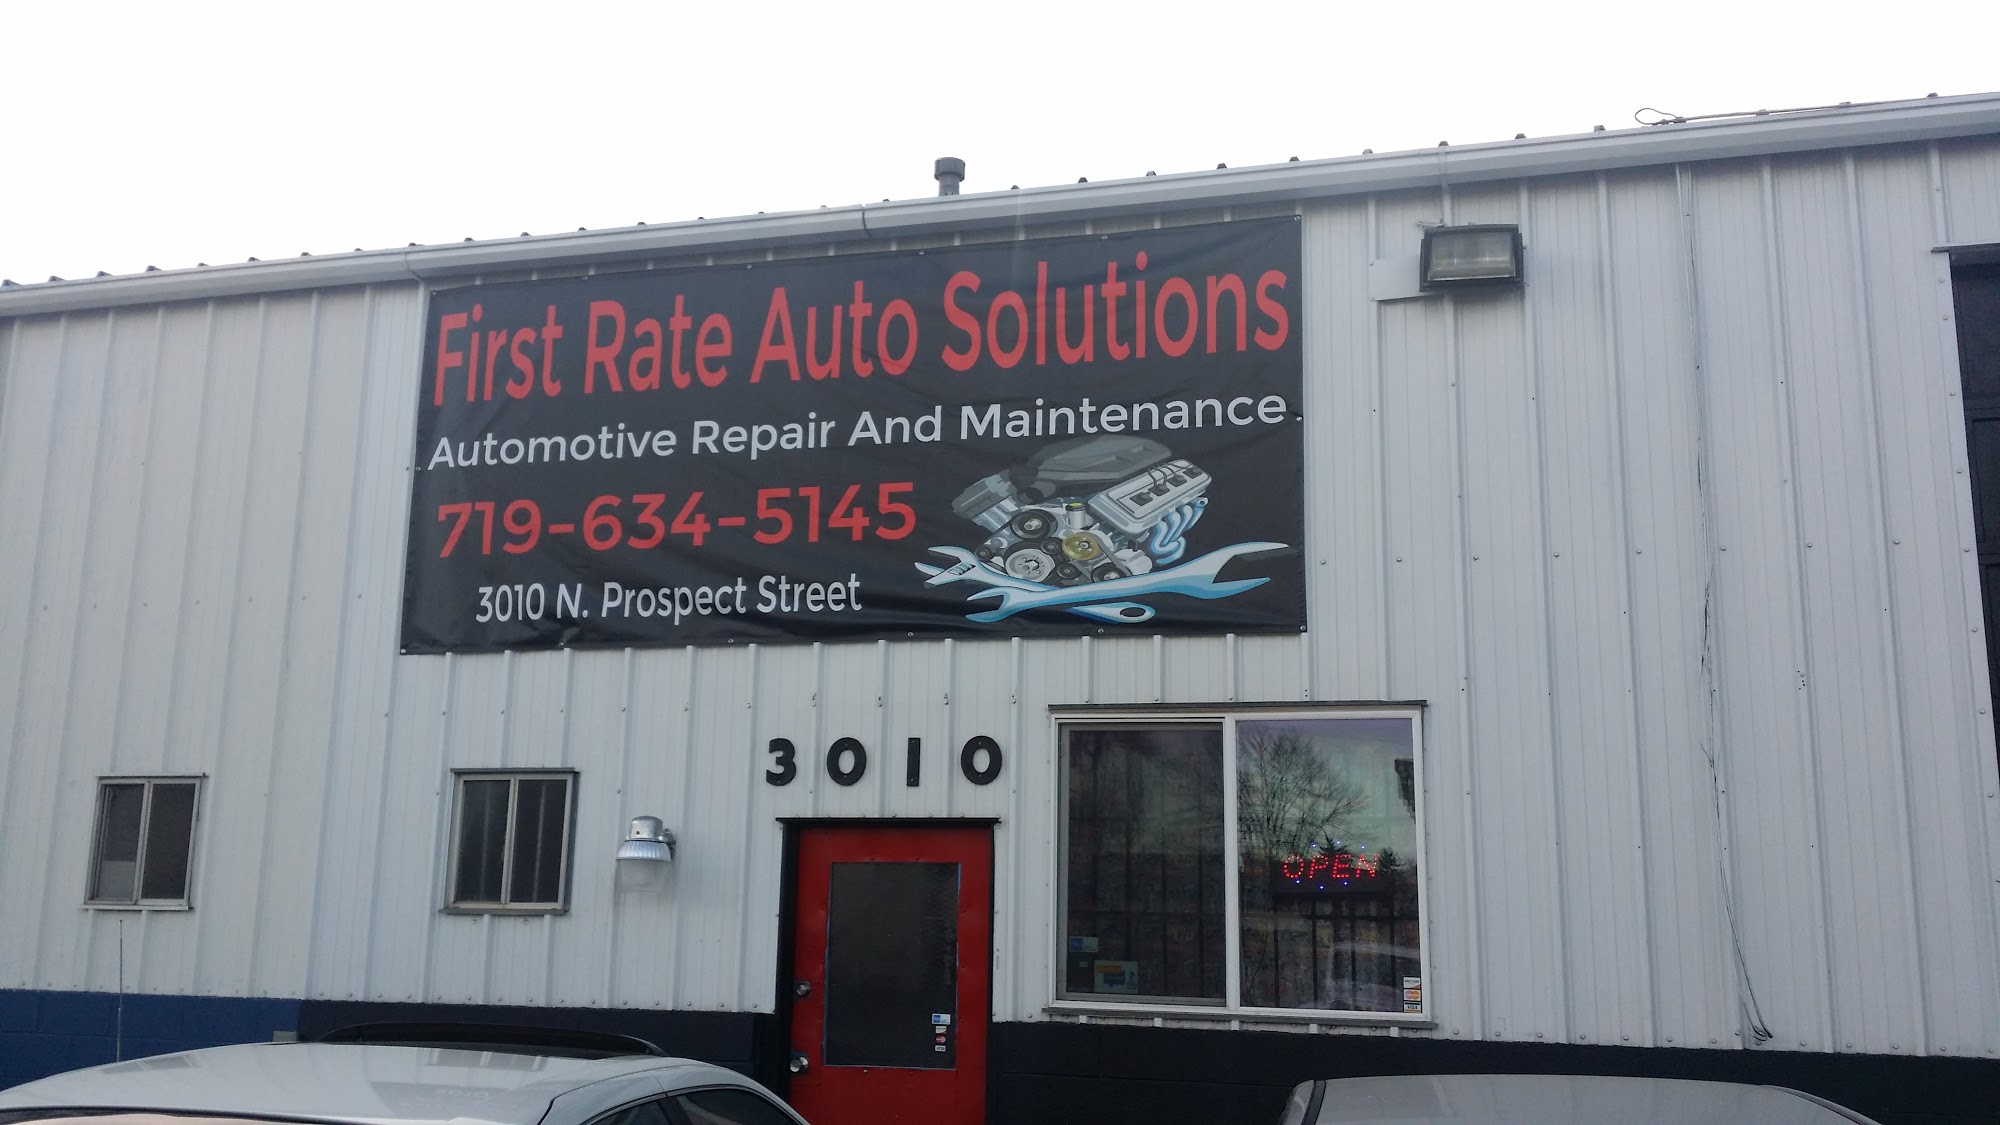 First Rate Auto Solutions